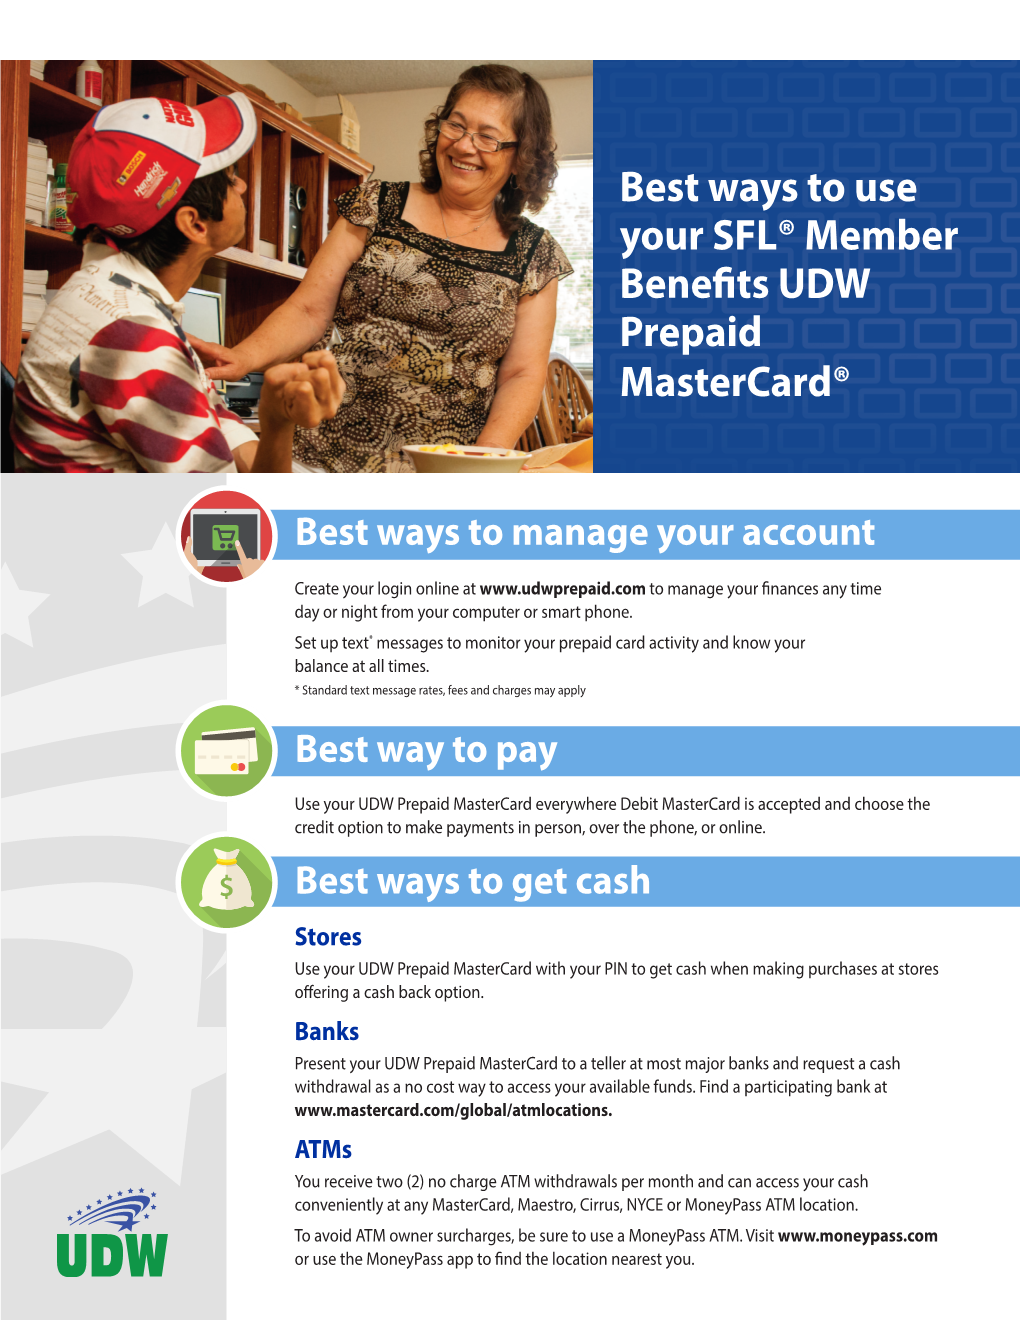 Best Ways to Use Your SFL® Member Benefits UDW Prepaid Mastercard®